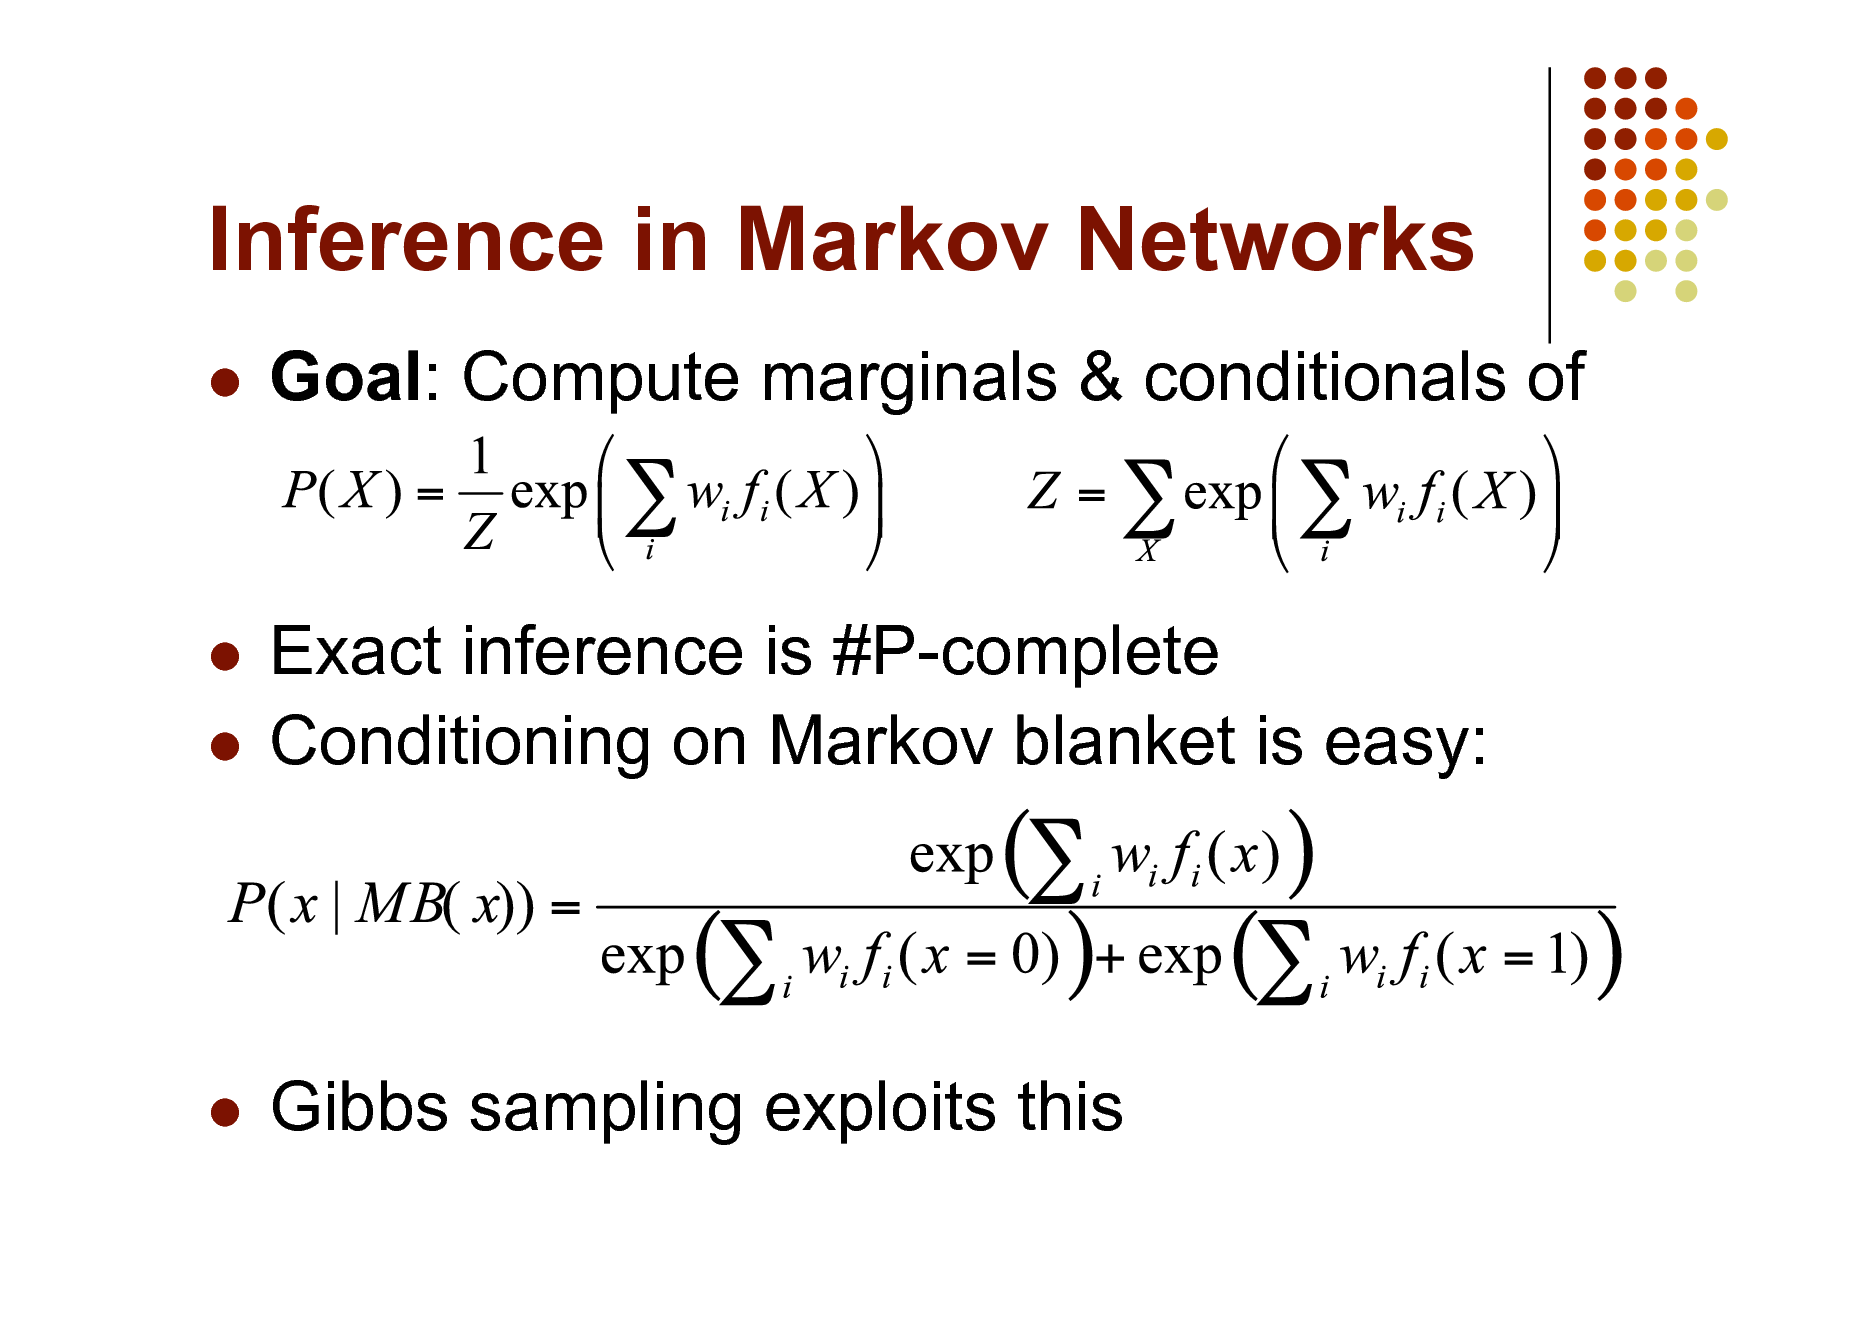 Slide: Inference in Markov Networks


Goal: Compute marginals & conditionals of

Exact inference is #P-complete  Conditioning on Markov blanket is easy:




Gibbs sampling exploits this

